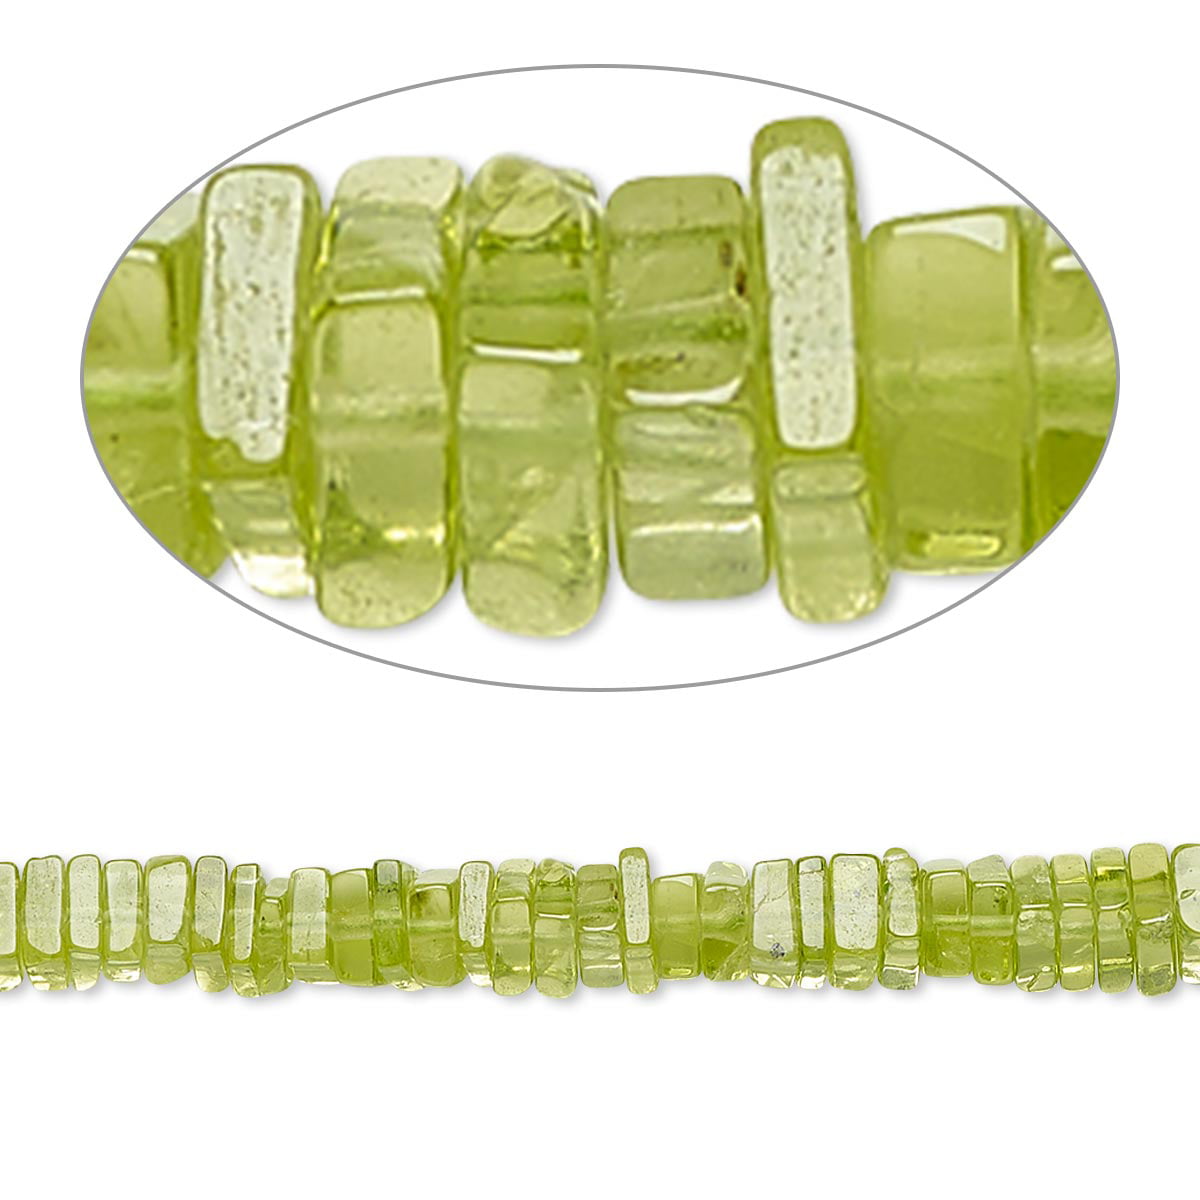 8mm Clear Green Peridot Color 10 Strands 25 Beads Per Strand 250 Beads 